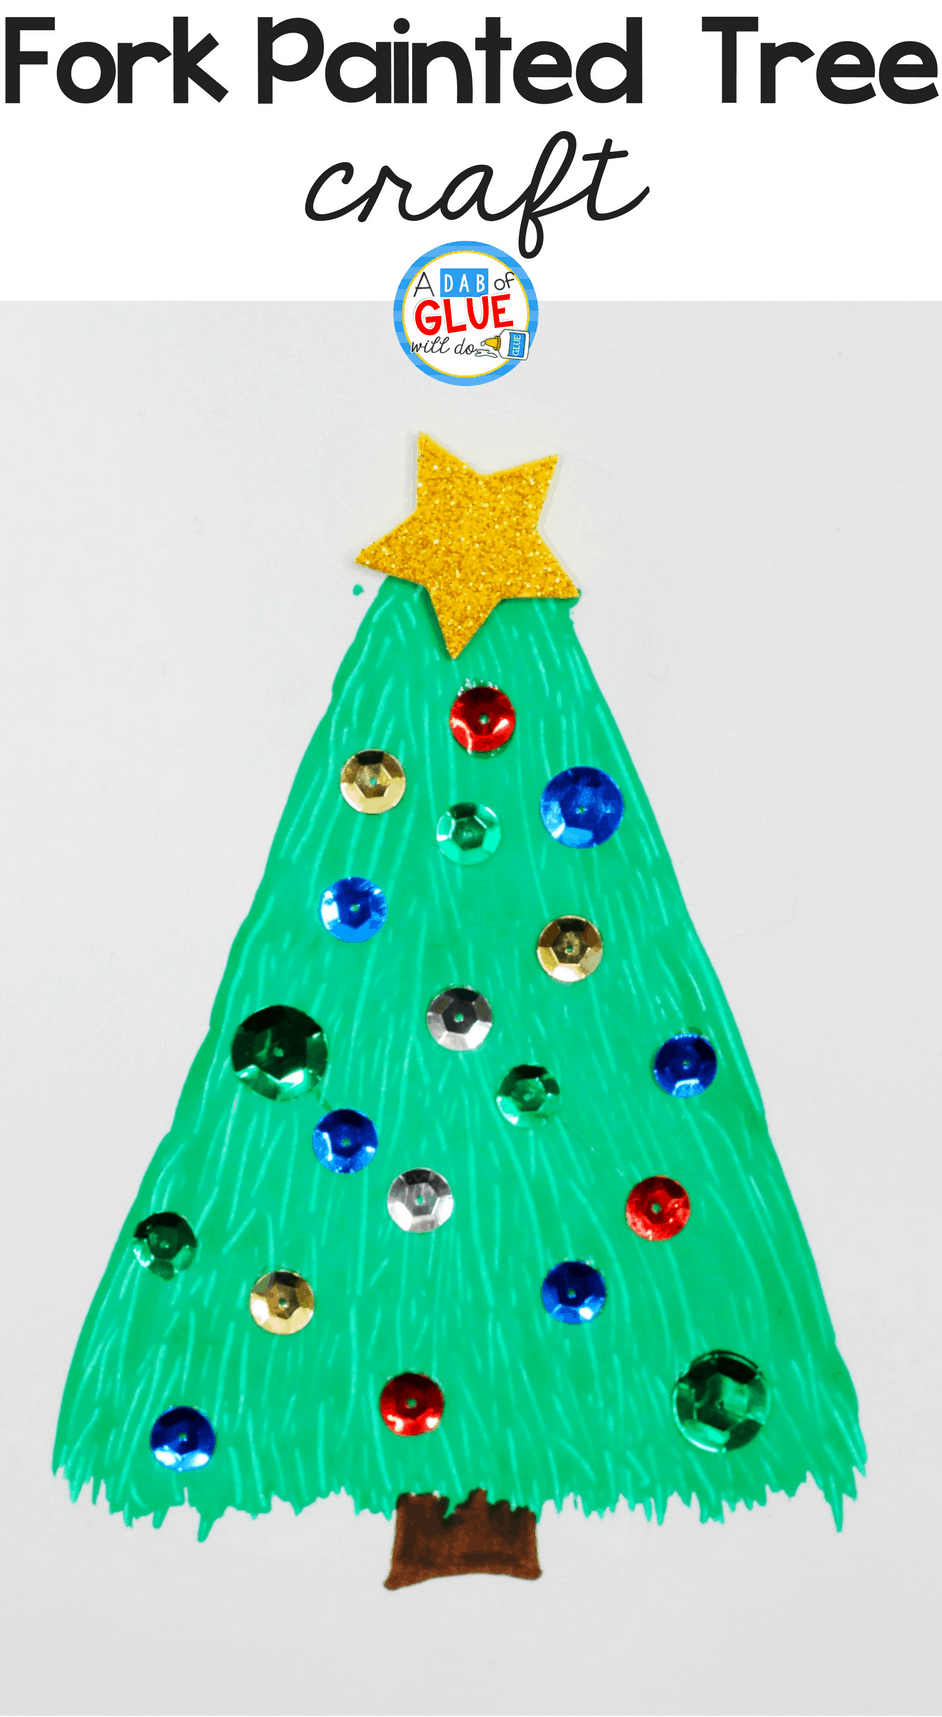 Fork painted Christmas tree craft for preschoolers